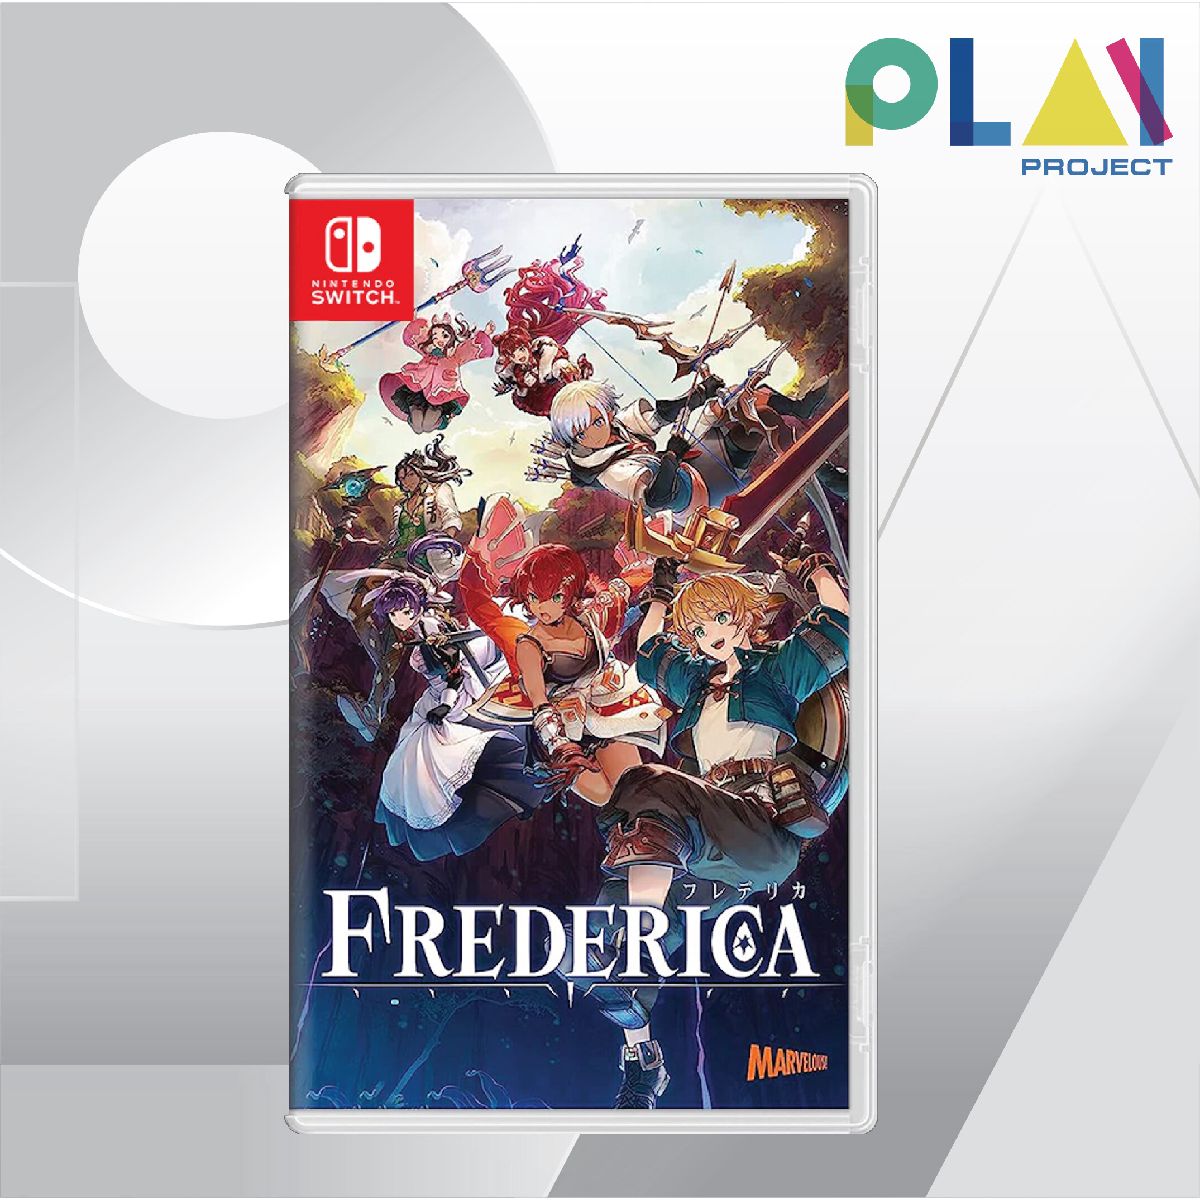 Play Project Nintendo Switch : Frederica แผ่นเกมนินเทนโด้ switc